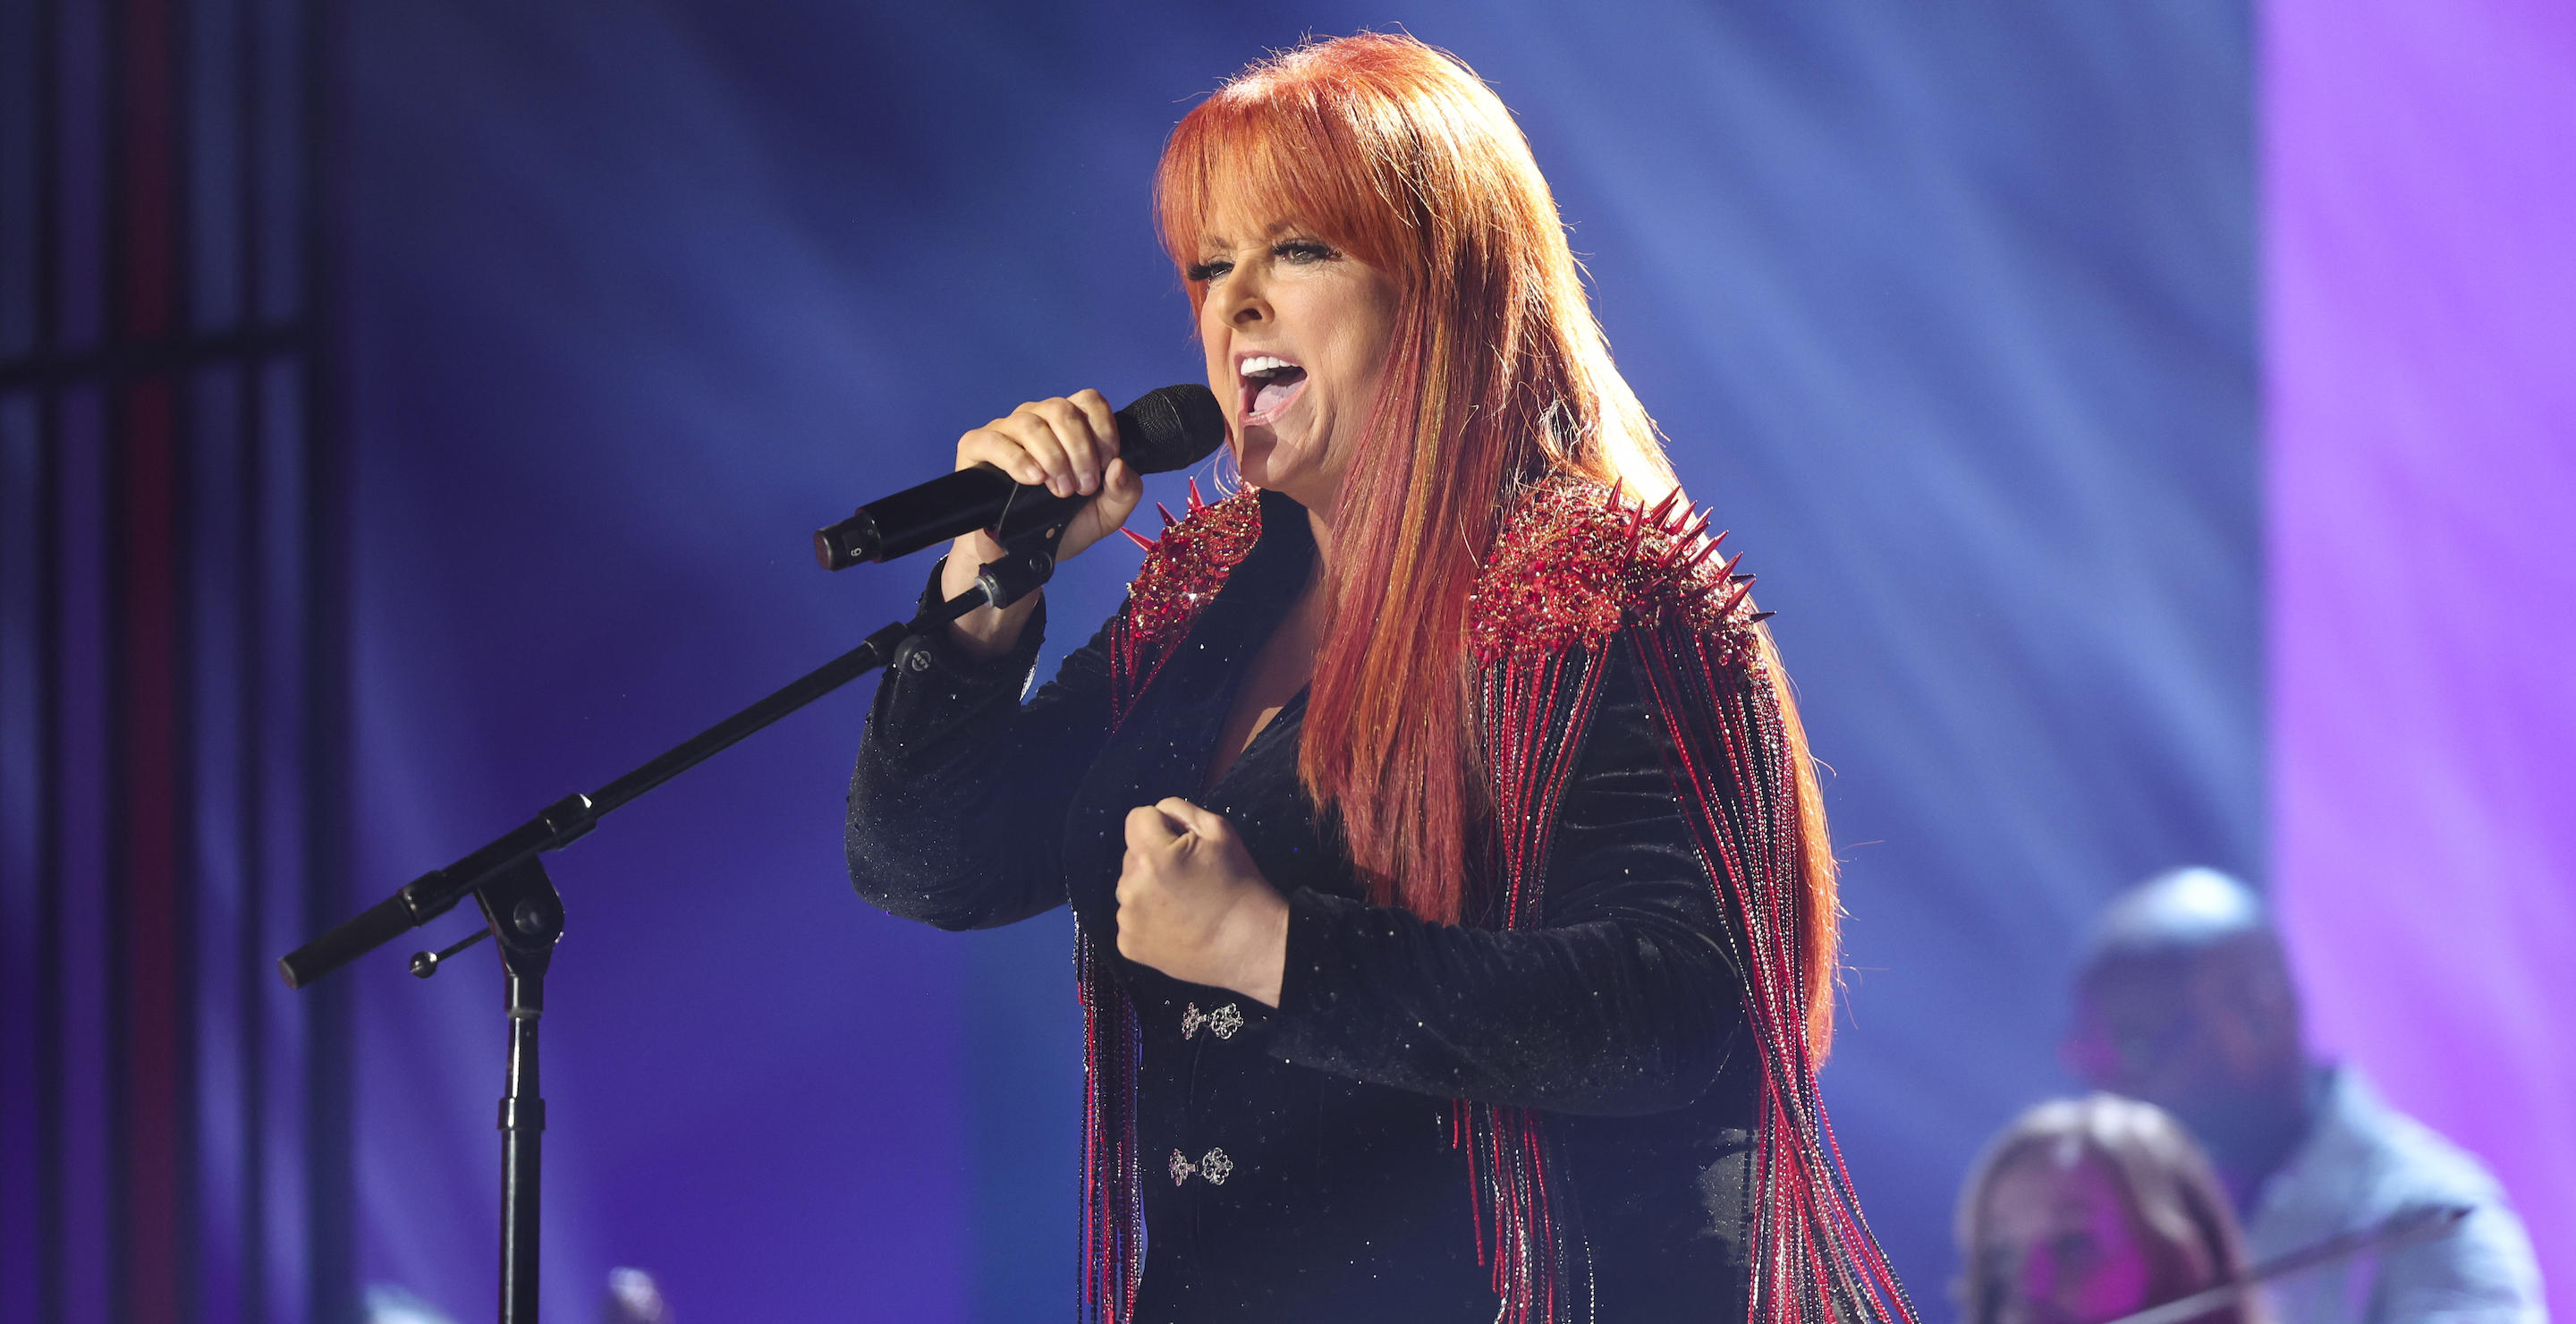 Wynonna Judd performs onstage at the 2023 CMT Music Awards held at Moody Center on April 2, 2023 in Austin, Texas.